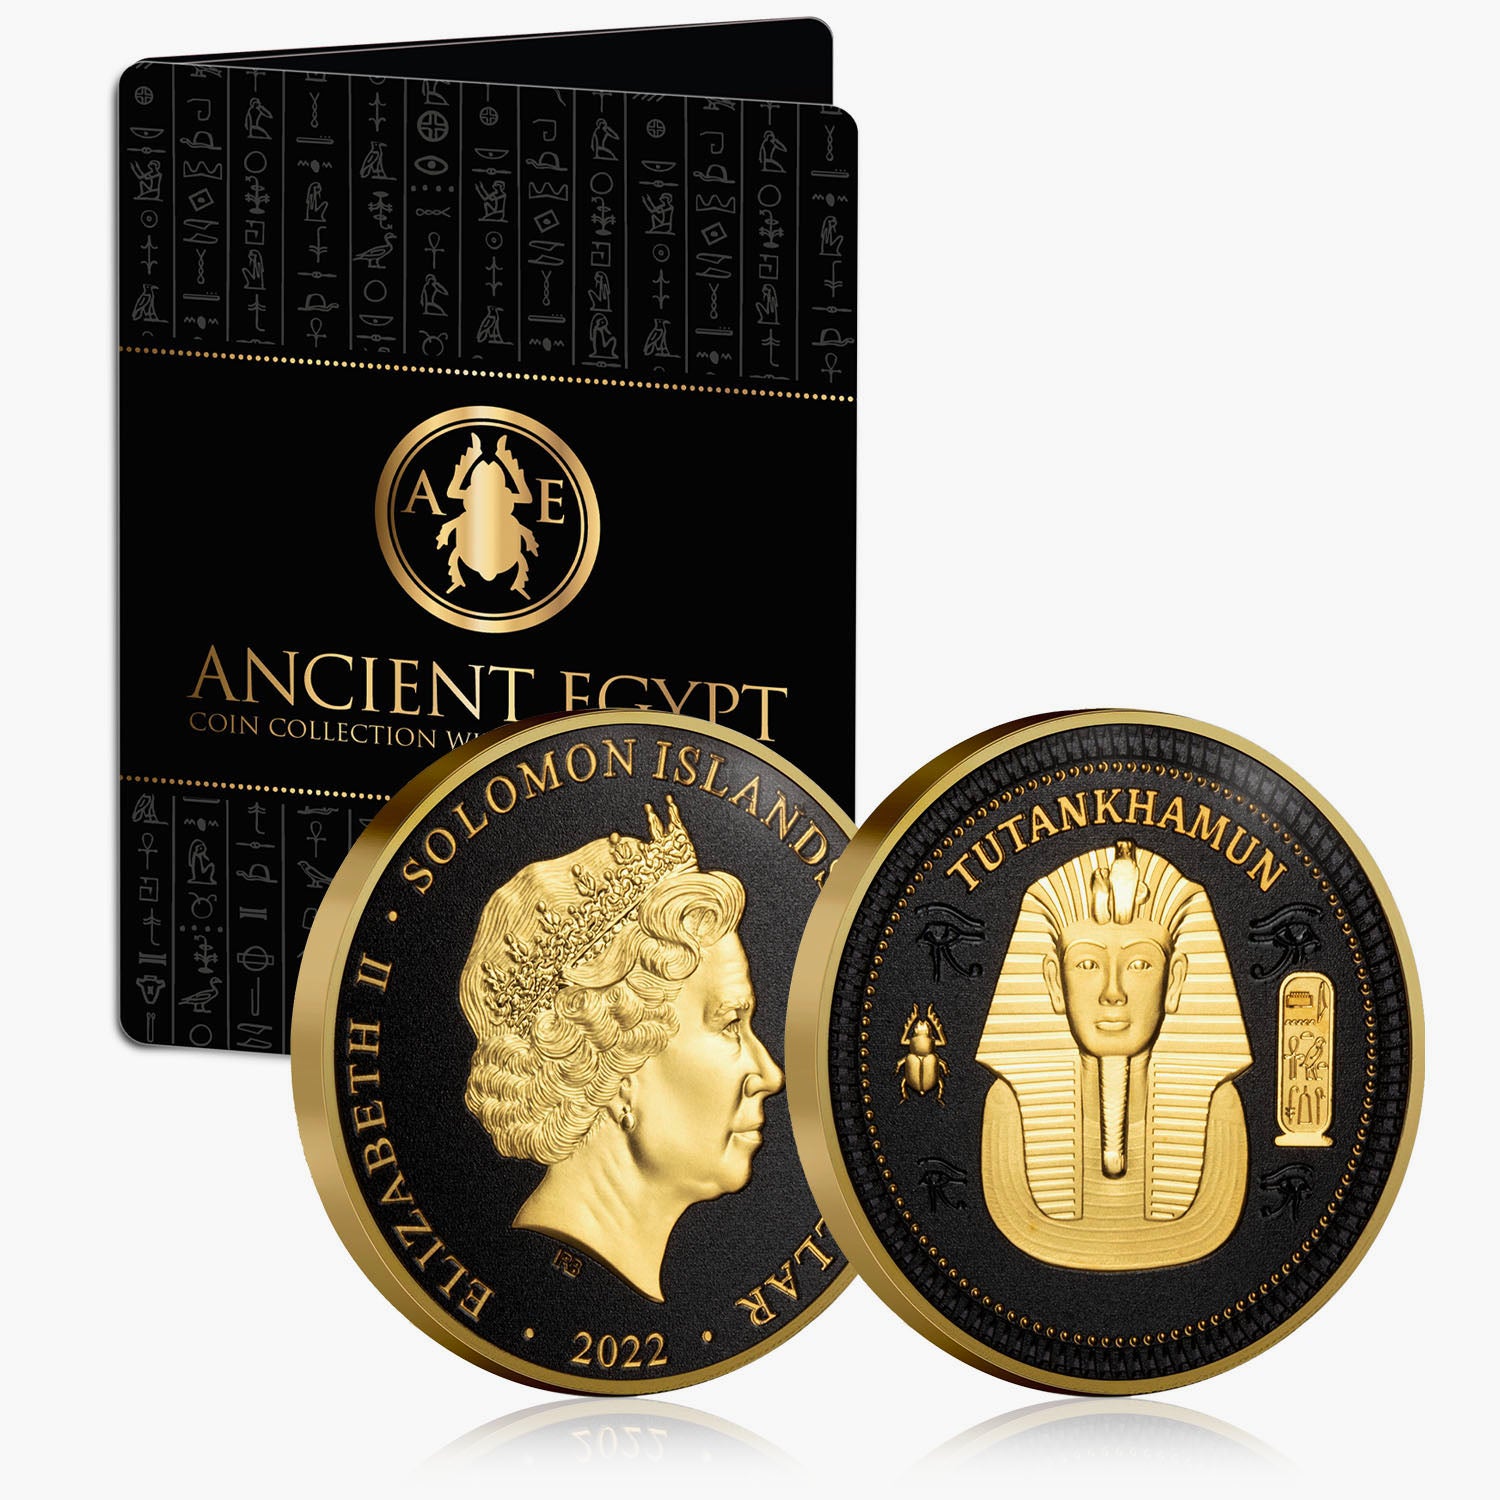 The Mysteries of Ancient Egypt 2022 Coin Collection